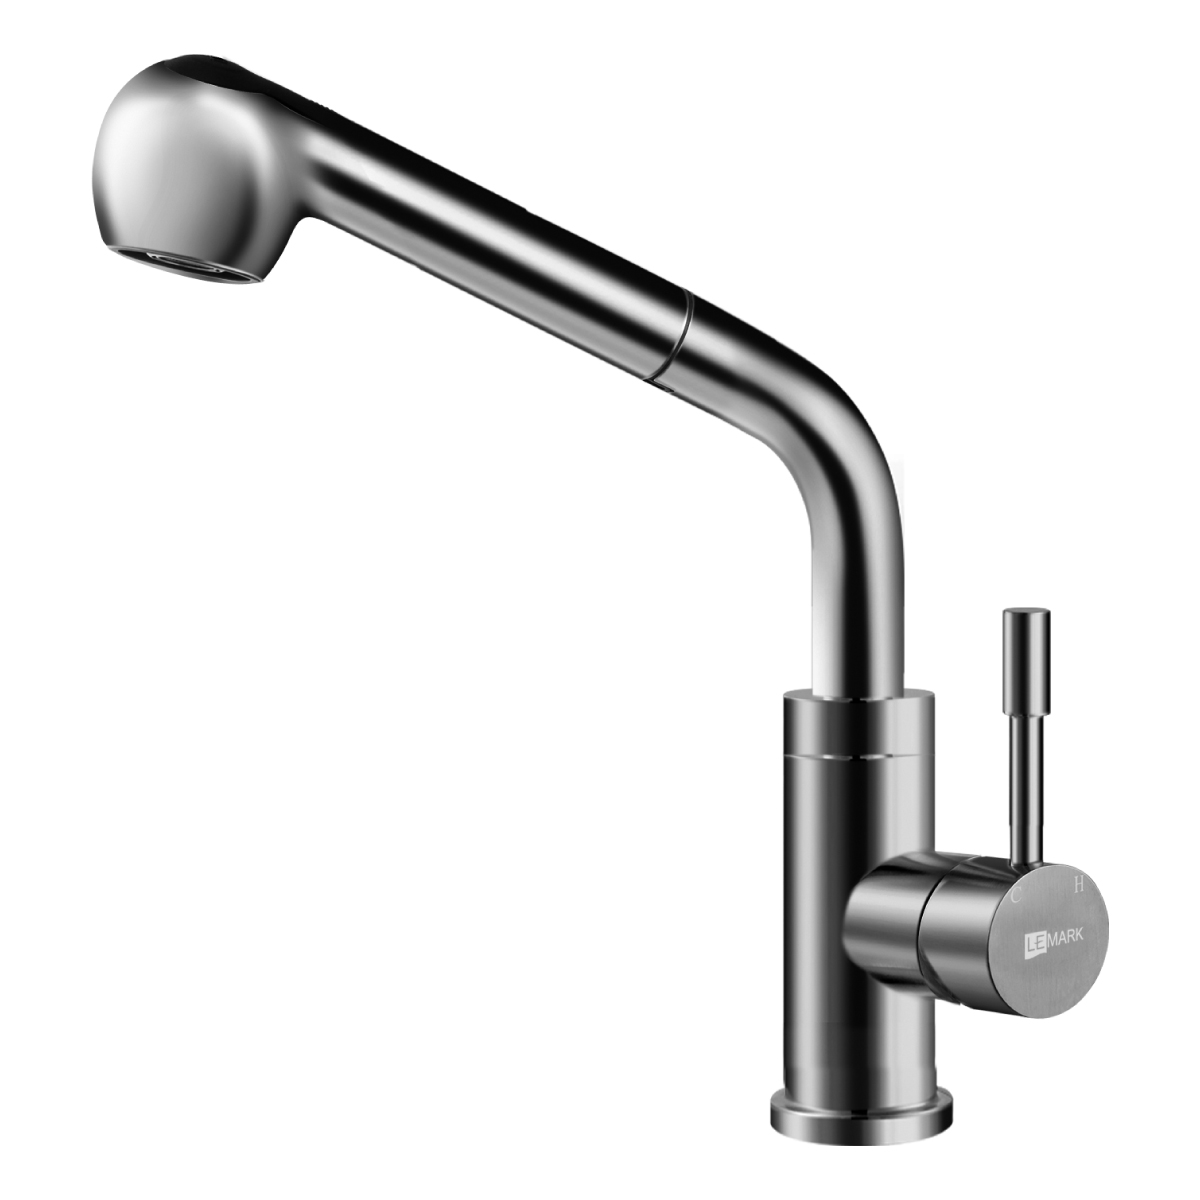 LM5076S Kitchen faucet
with pull-out swivel spout